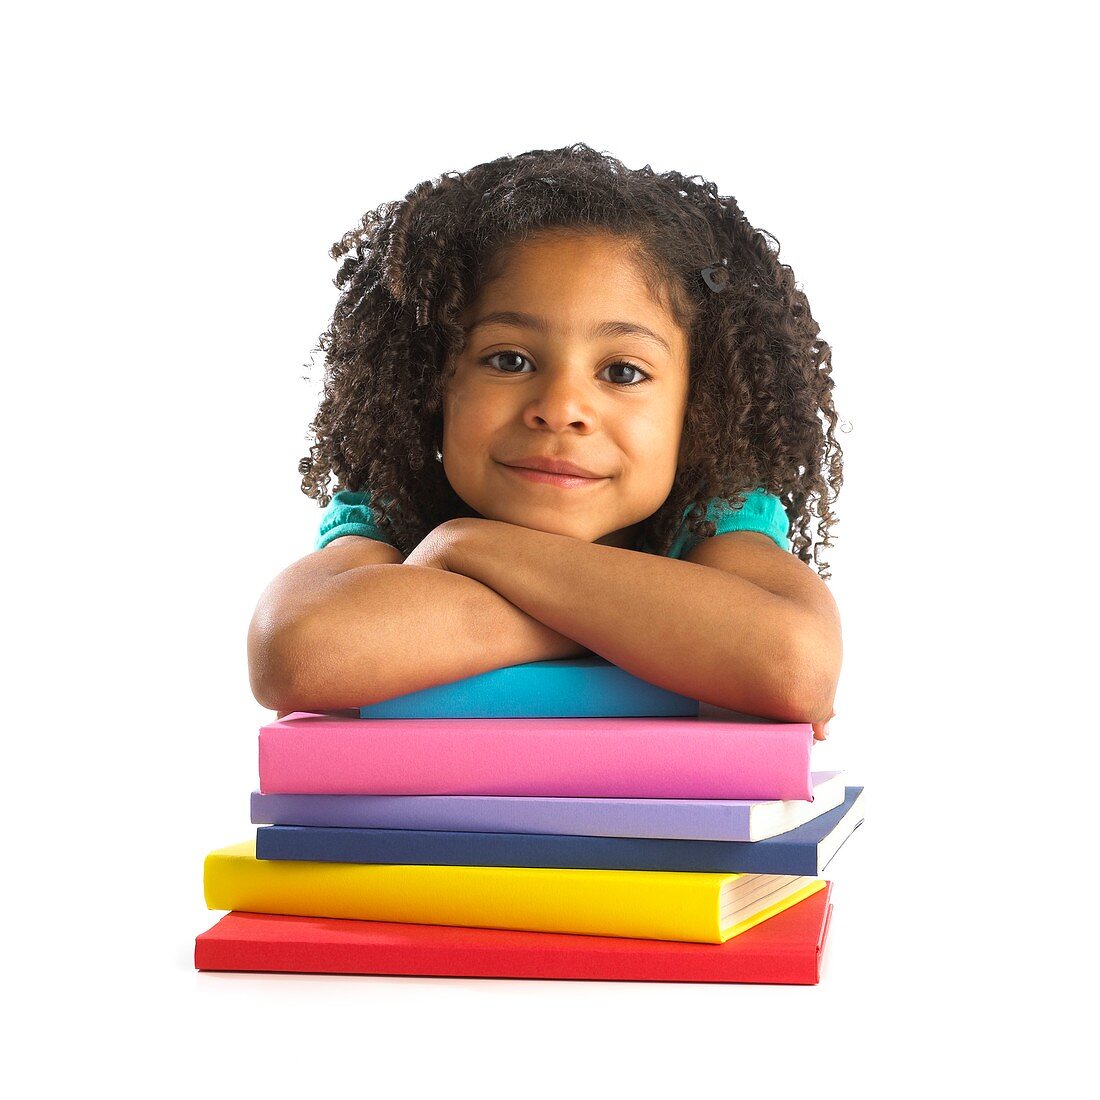 Young girl with school books